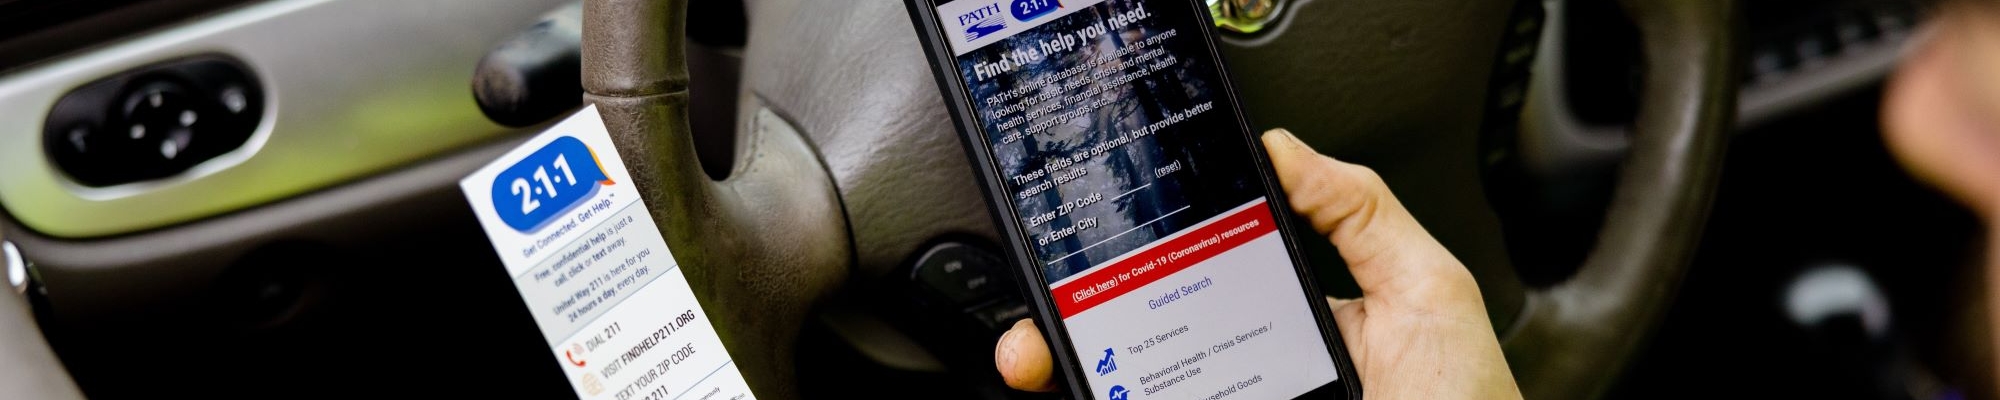 A person holds a smartphone displaying the FindHelp211.org website.